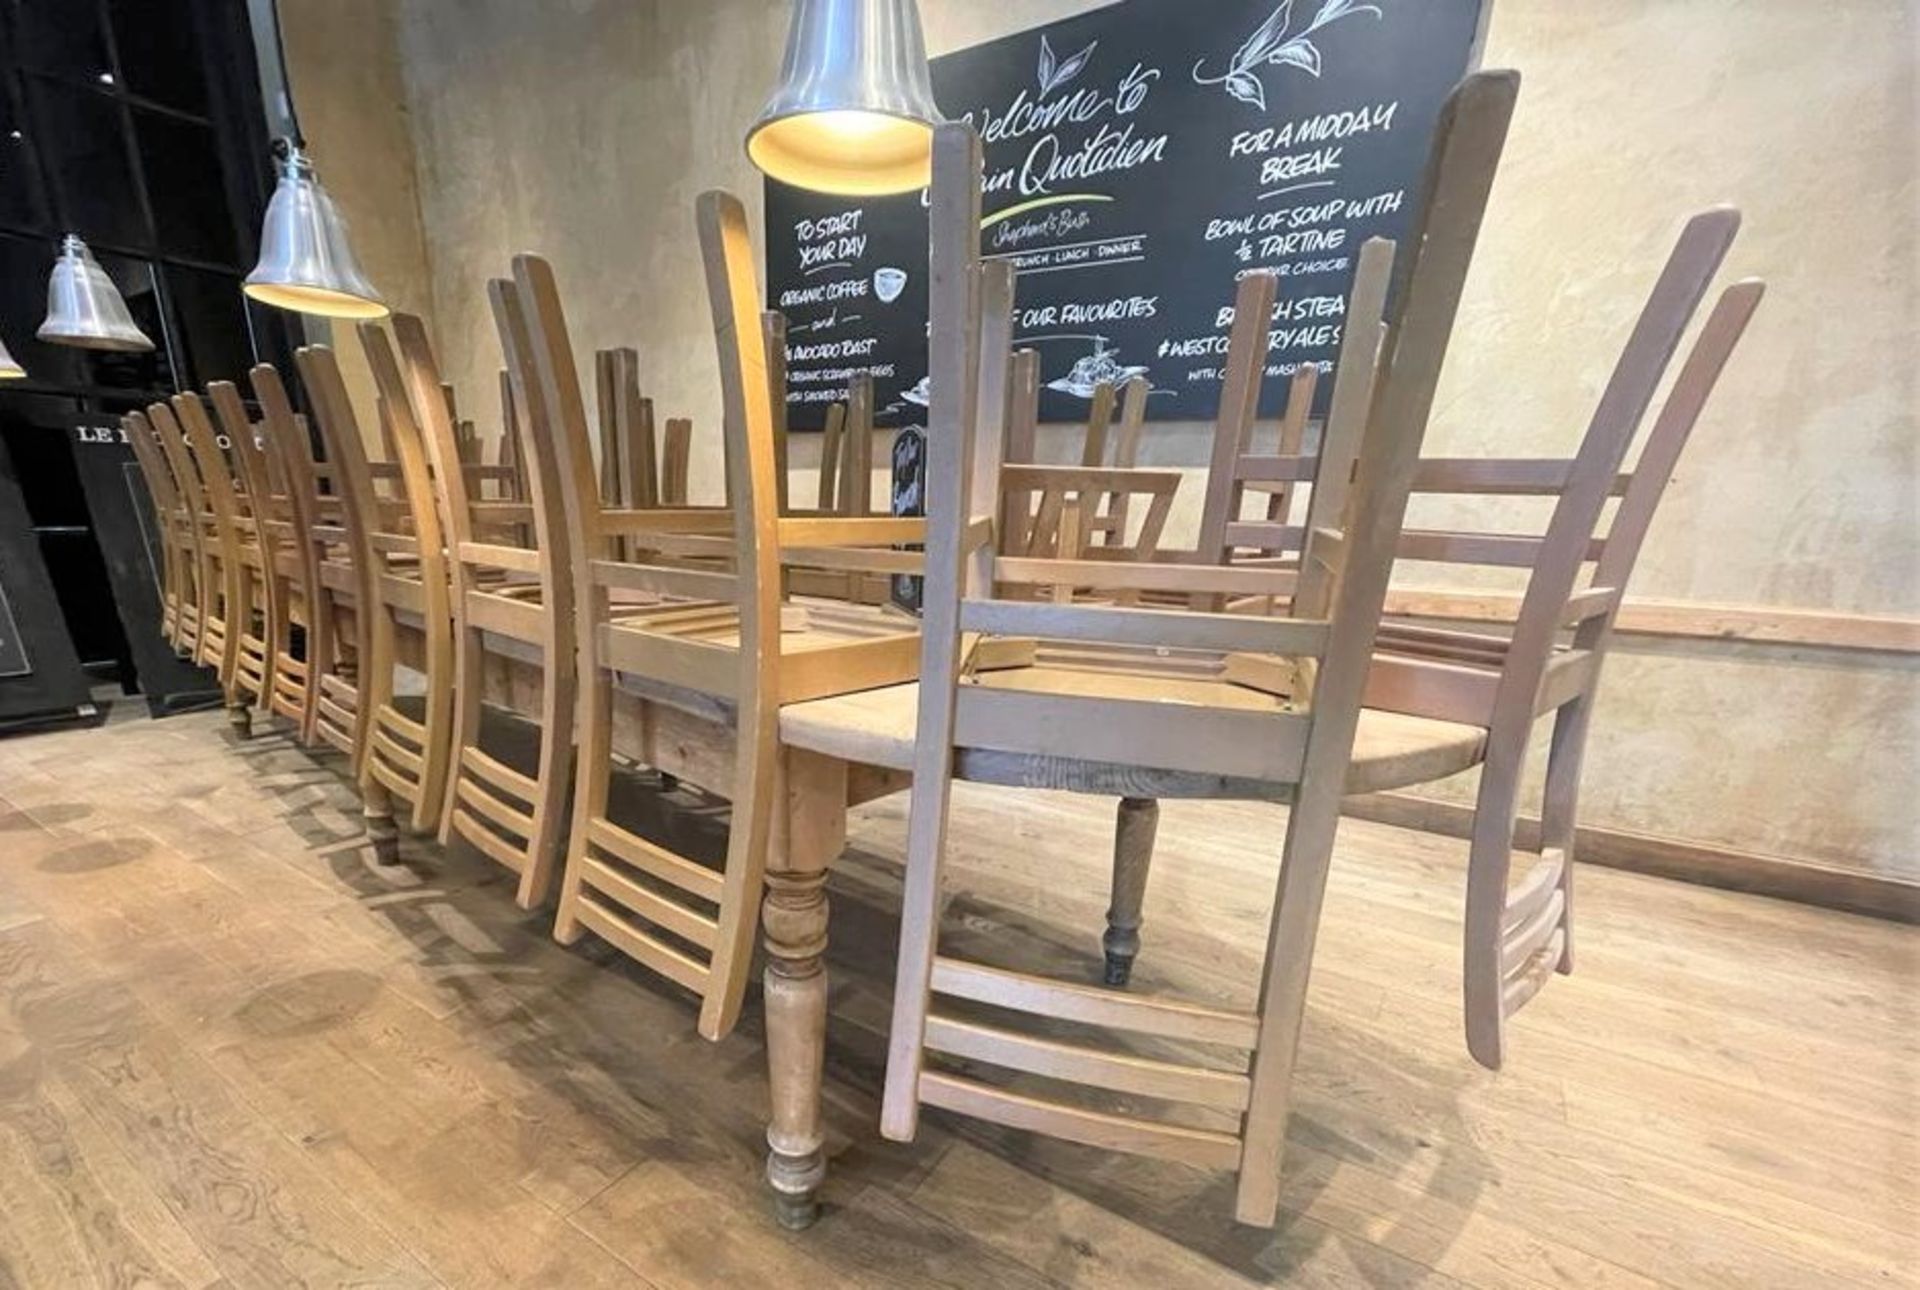 8 x Restaurant Dining Chairs With a Light Wood Finish - Image 5 of 5